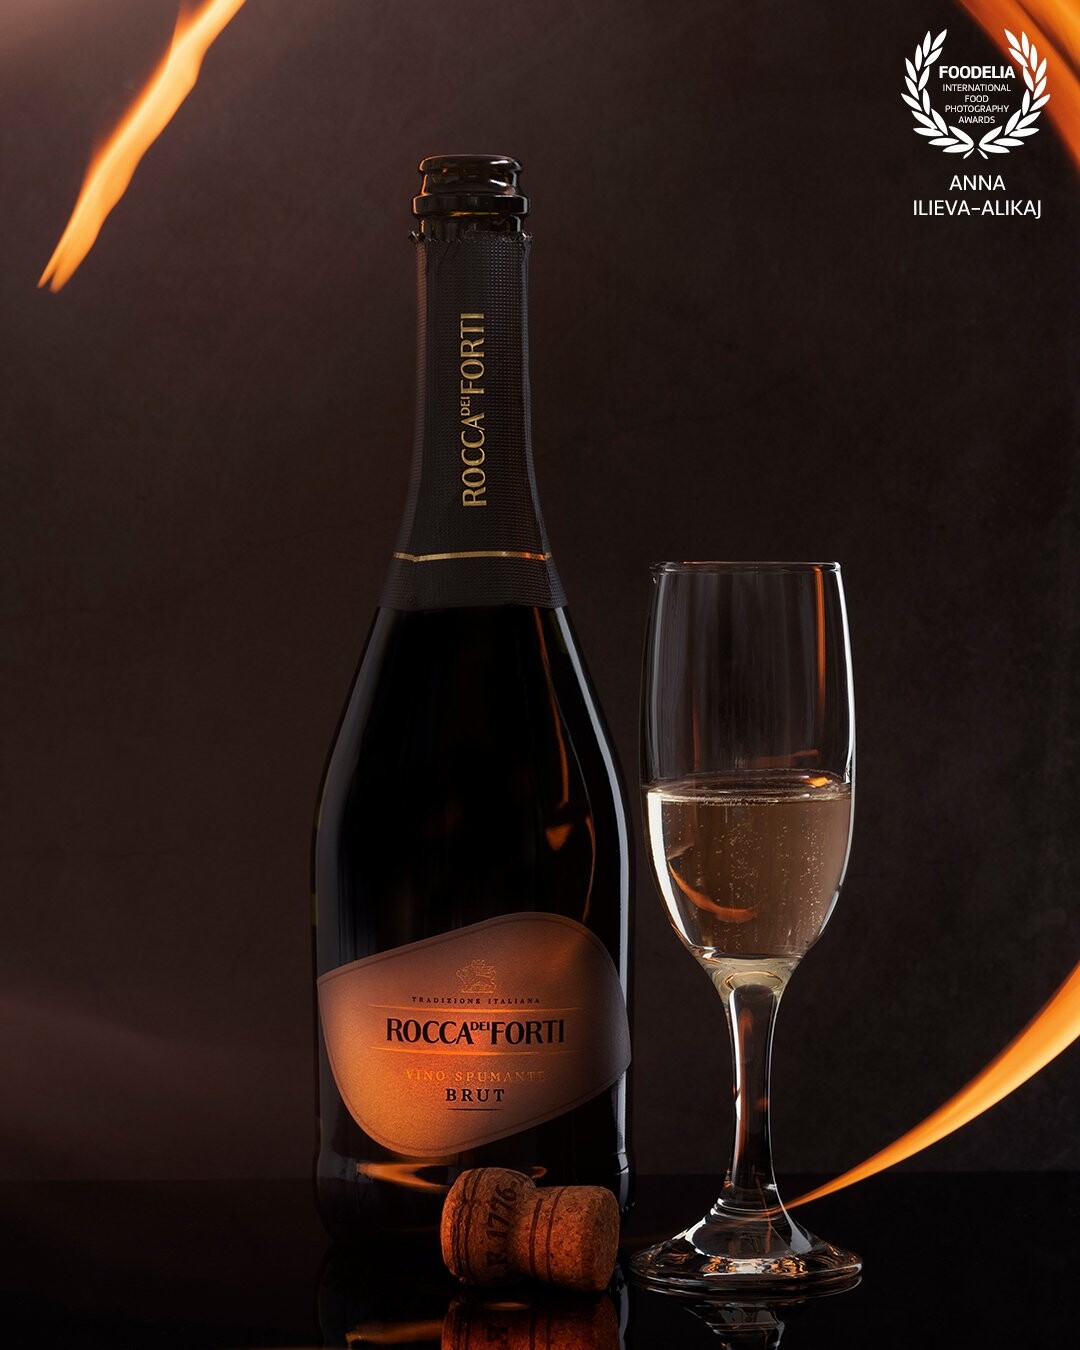 Sparkling wine, fireworks and falling "meteorites". For this photo I chose to create a dark mood with illuminating elements to best represent this Italian sparkling wine.